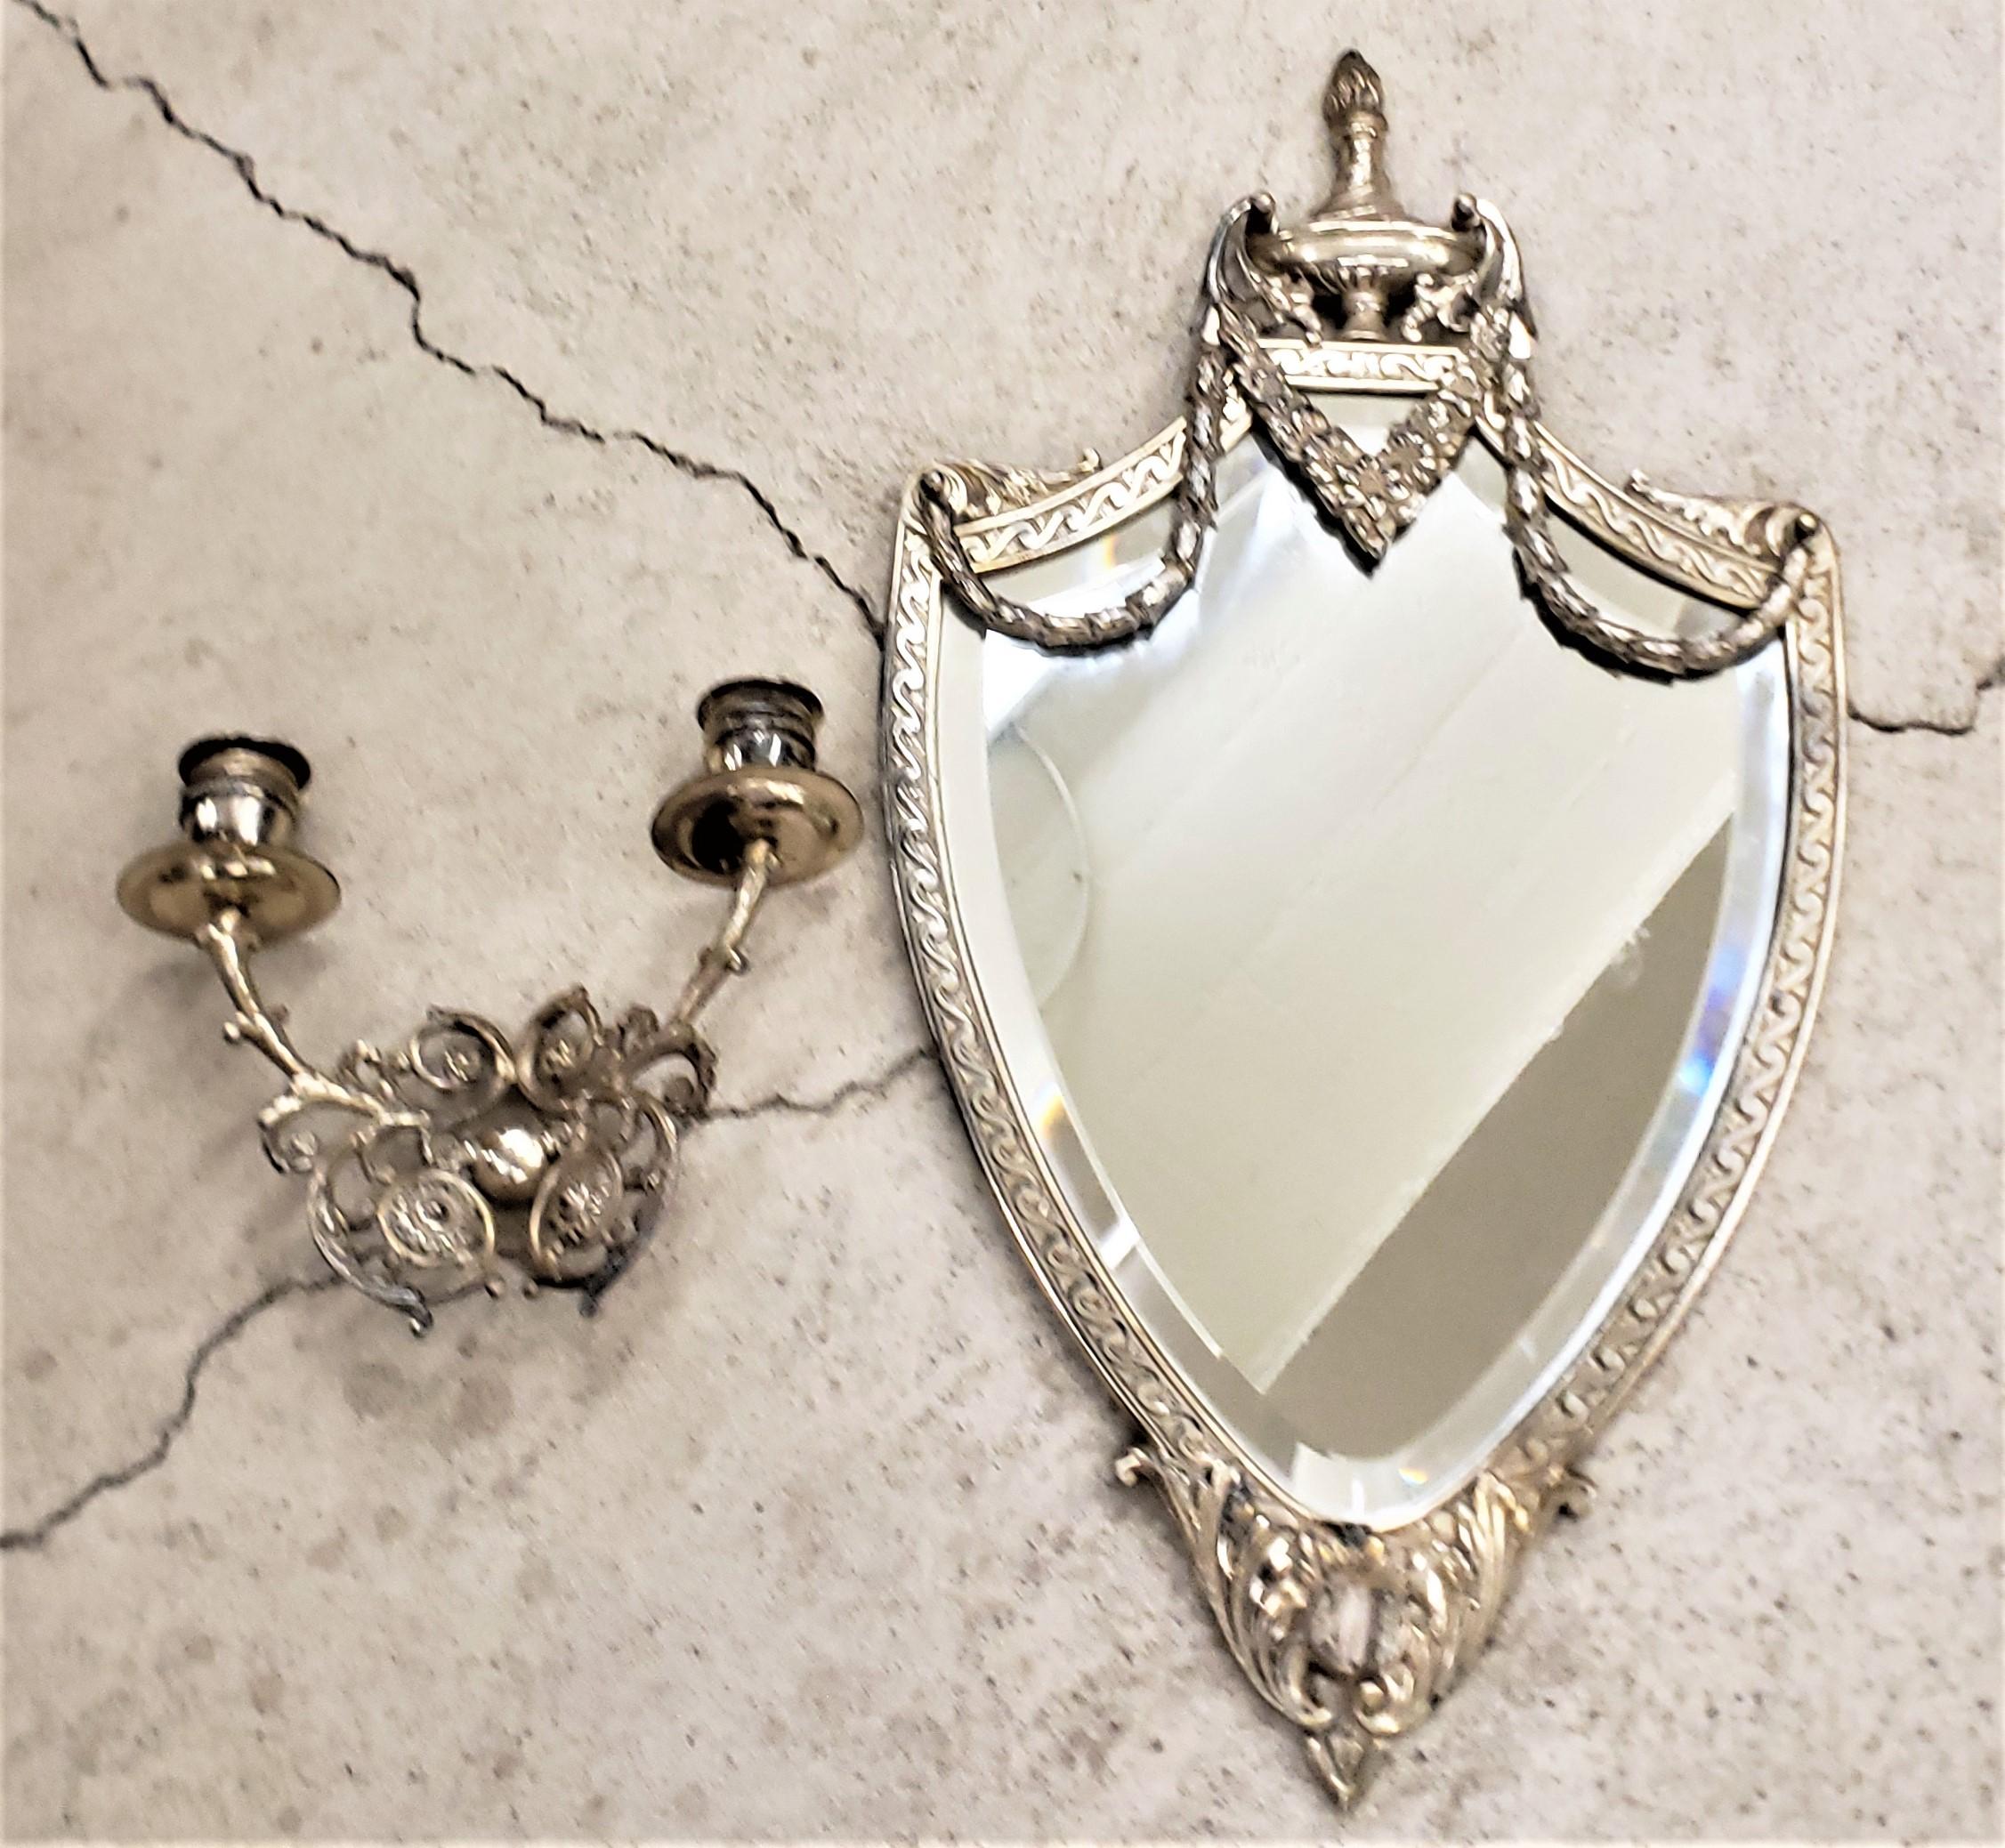 Antique Silver Plated Shield Shaped & Beveled Wall Mirror or Candle Sconce In Good Condition For Sale In Hamilton, Ontario